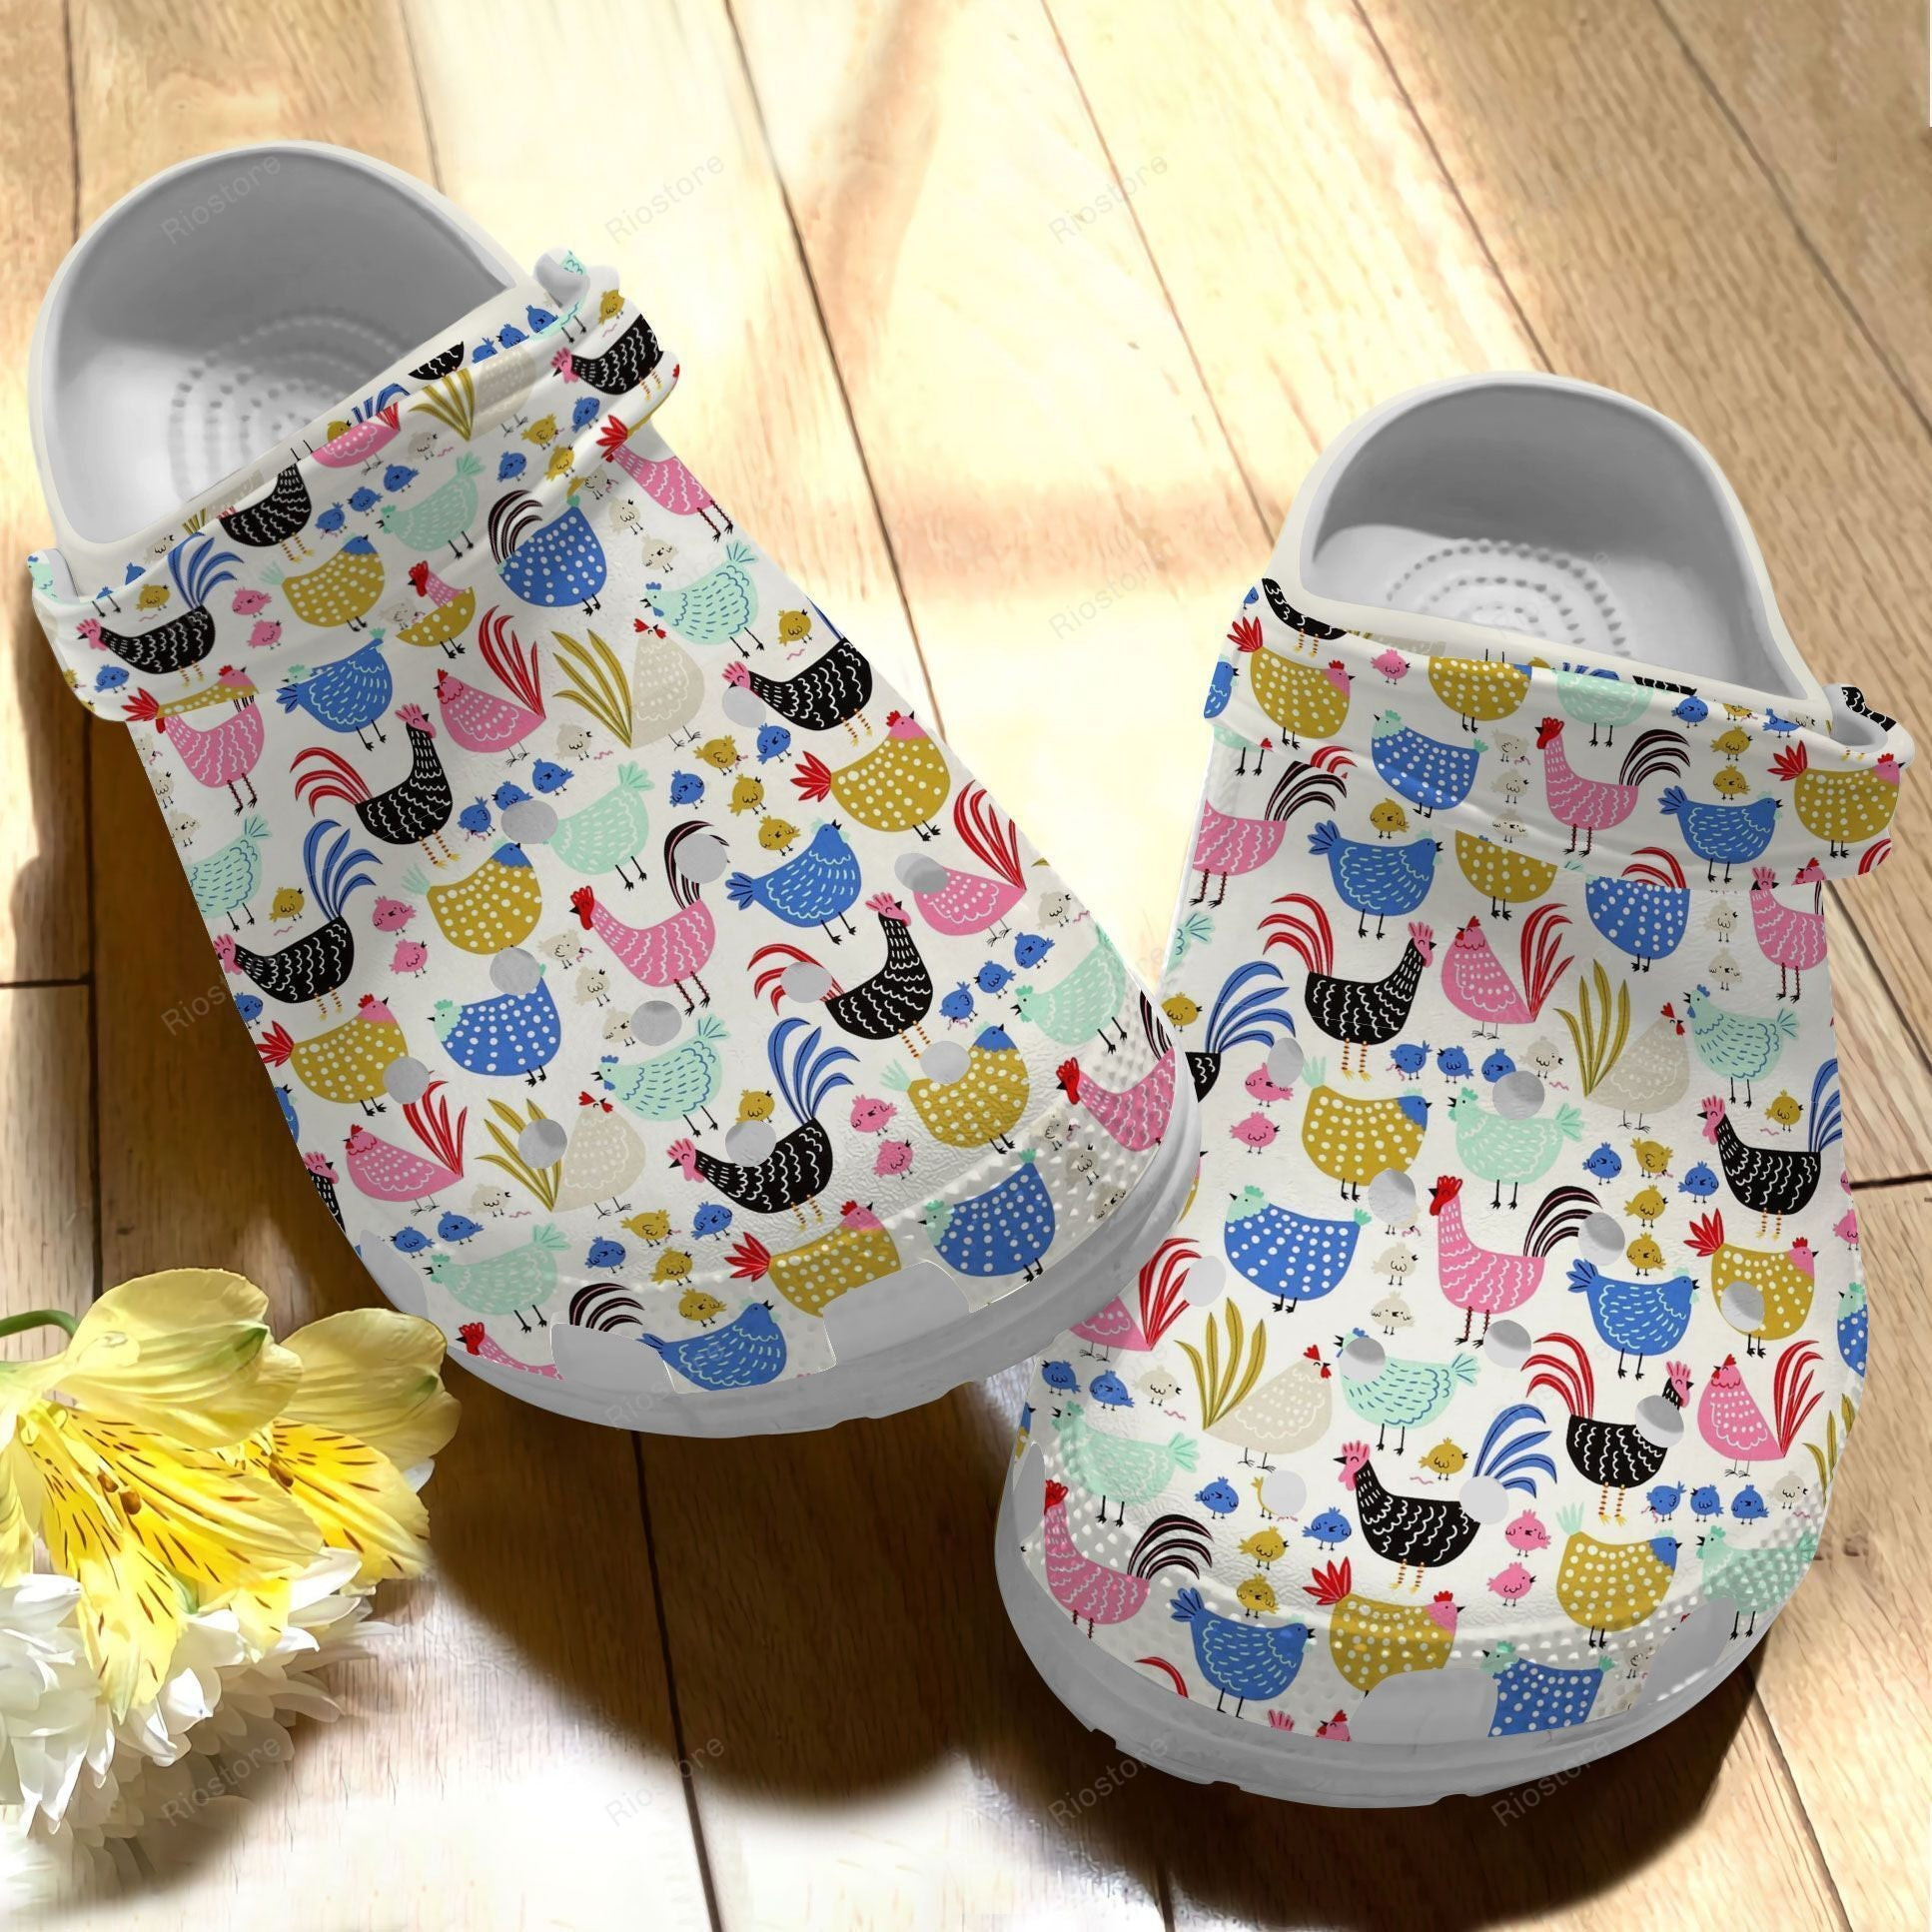 Family Chicken Croc Shoes For Birthday - Chicken Shoes Crocbland Clog Gifts For Family Members